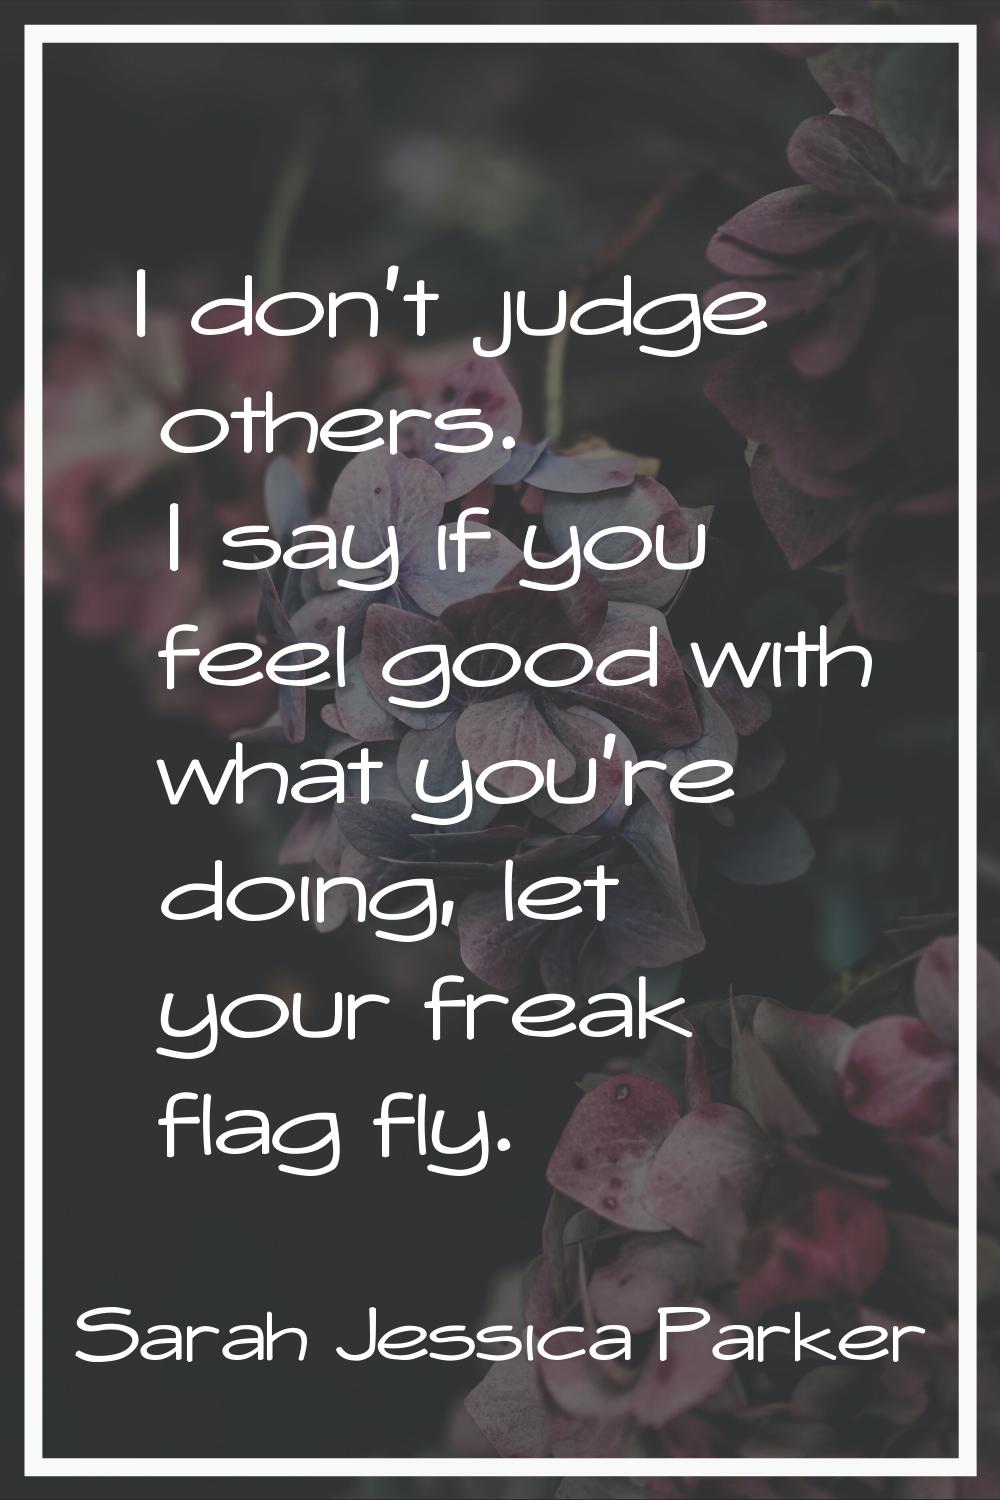 I don't judge others. I say if you feel good with what you're doing, let your freak flag fly.